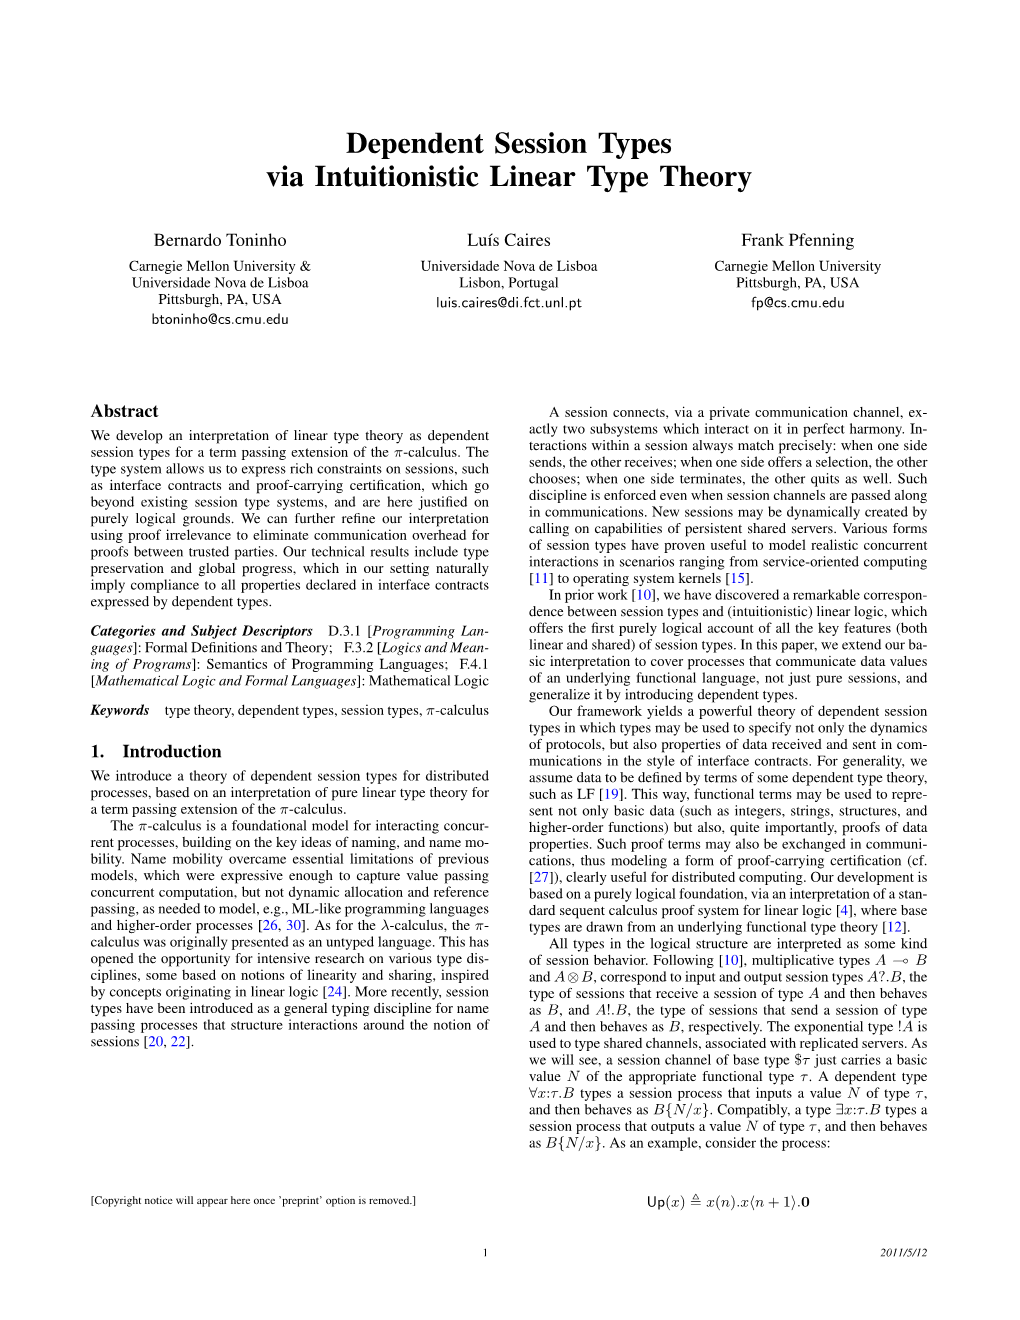 Dependent Session Types Via Intuitionistic Linear Type Theory